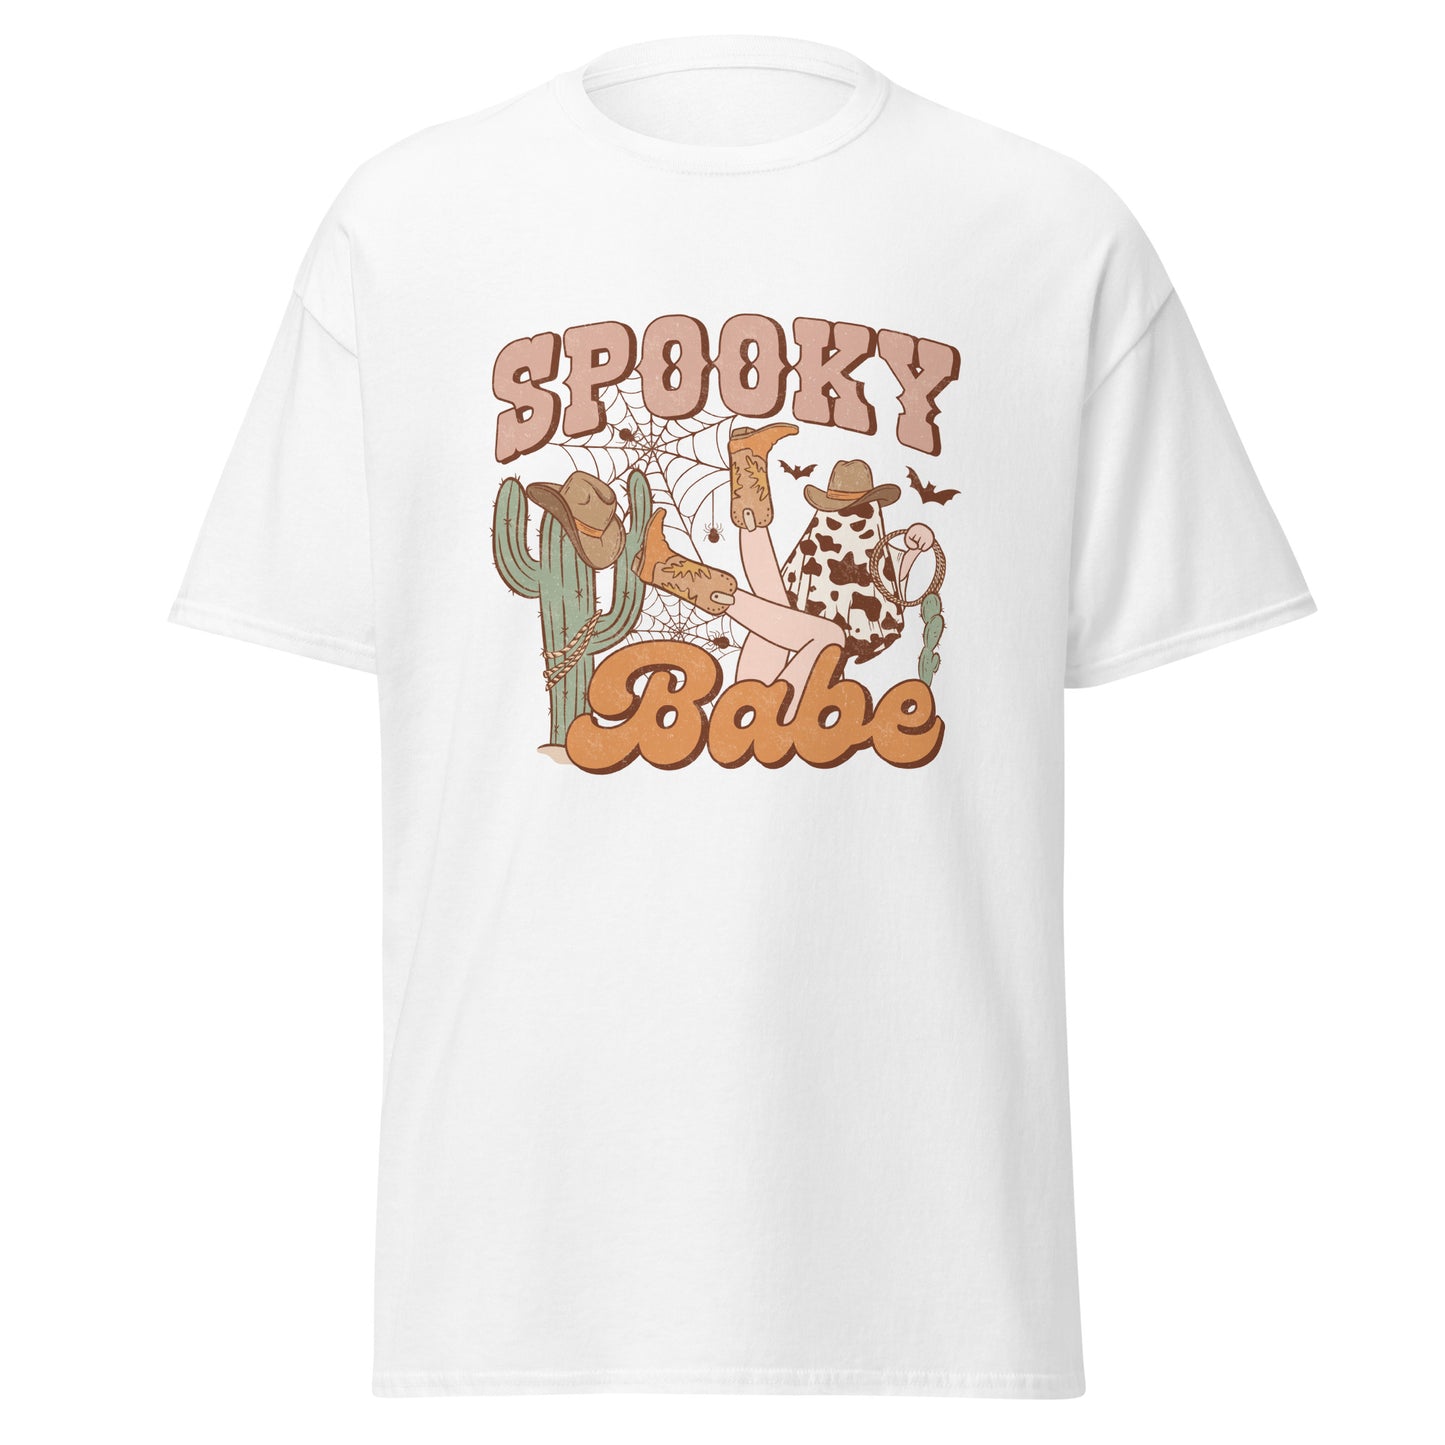 Spooky babe , Halloween Design Soft Style Heavy Cotton T-Shirt